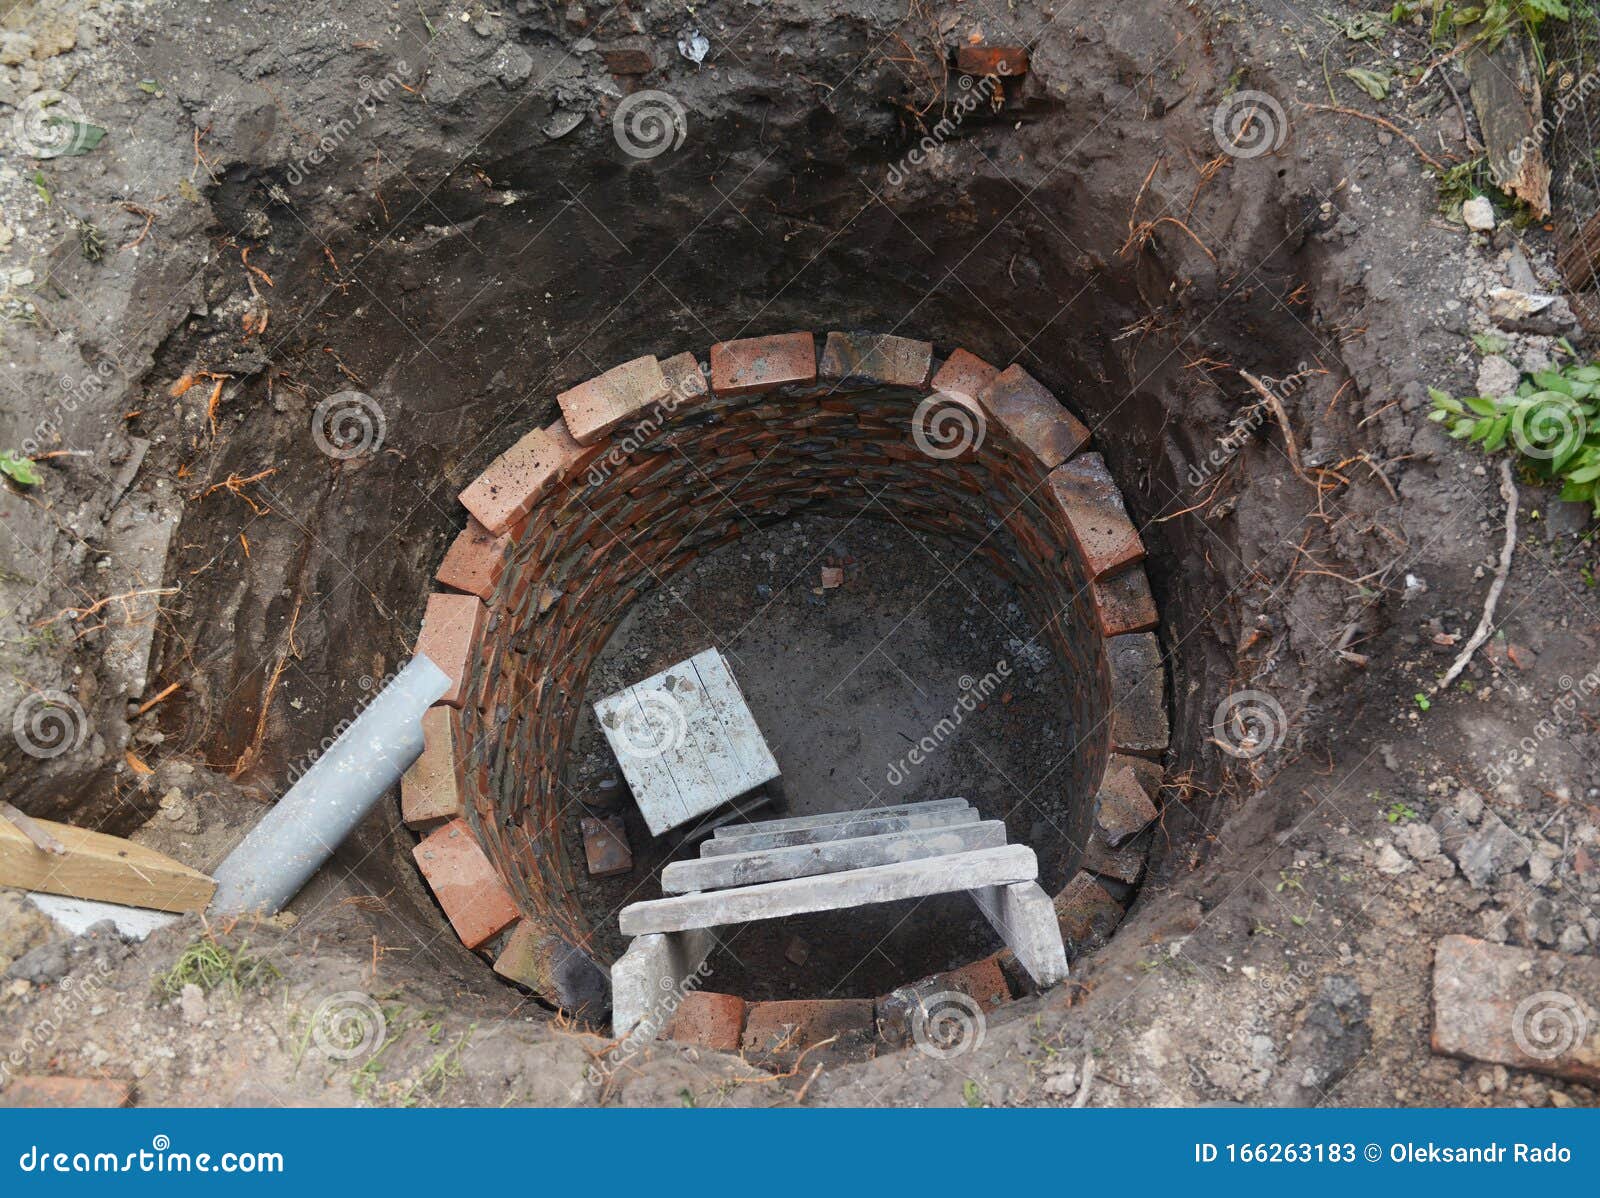 1 055 Brick Sewer Photos Free Royalty Free Stock Photos From Dreamstime